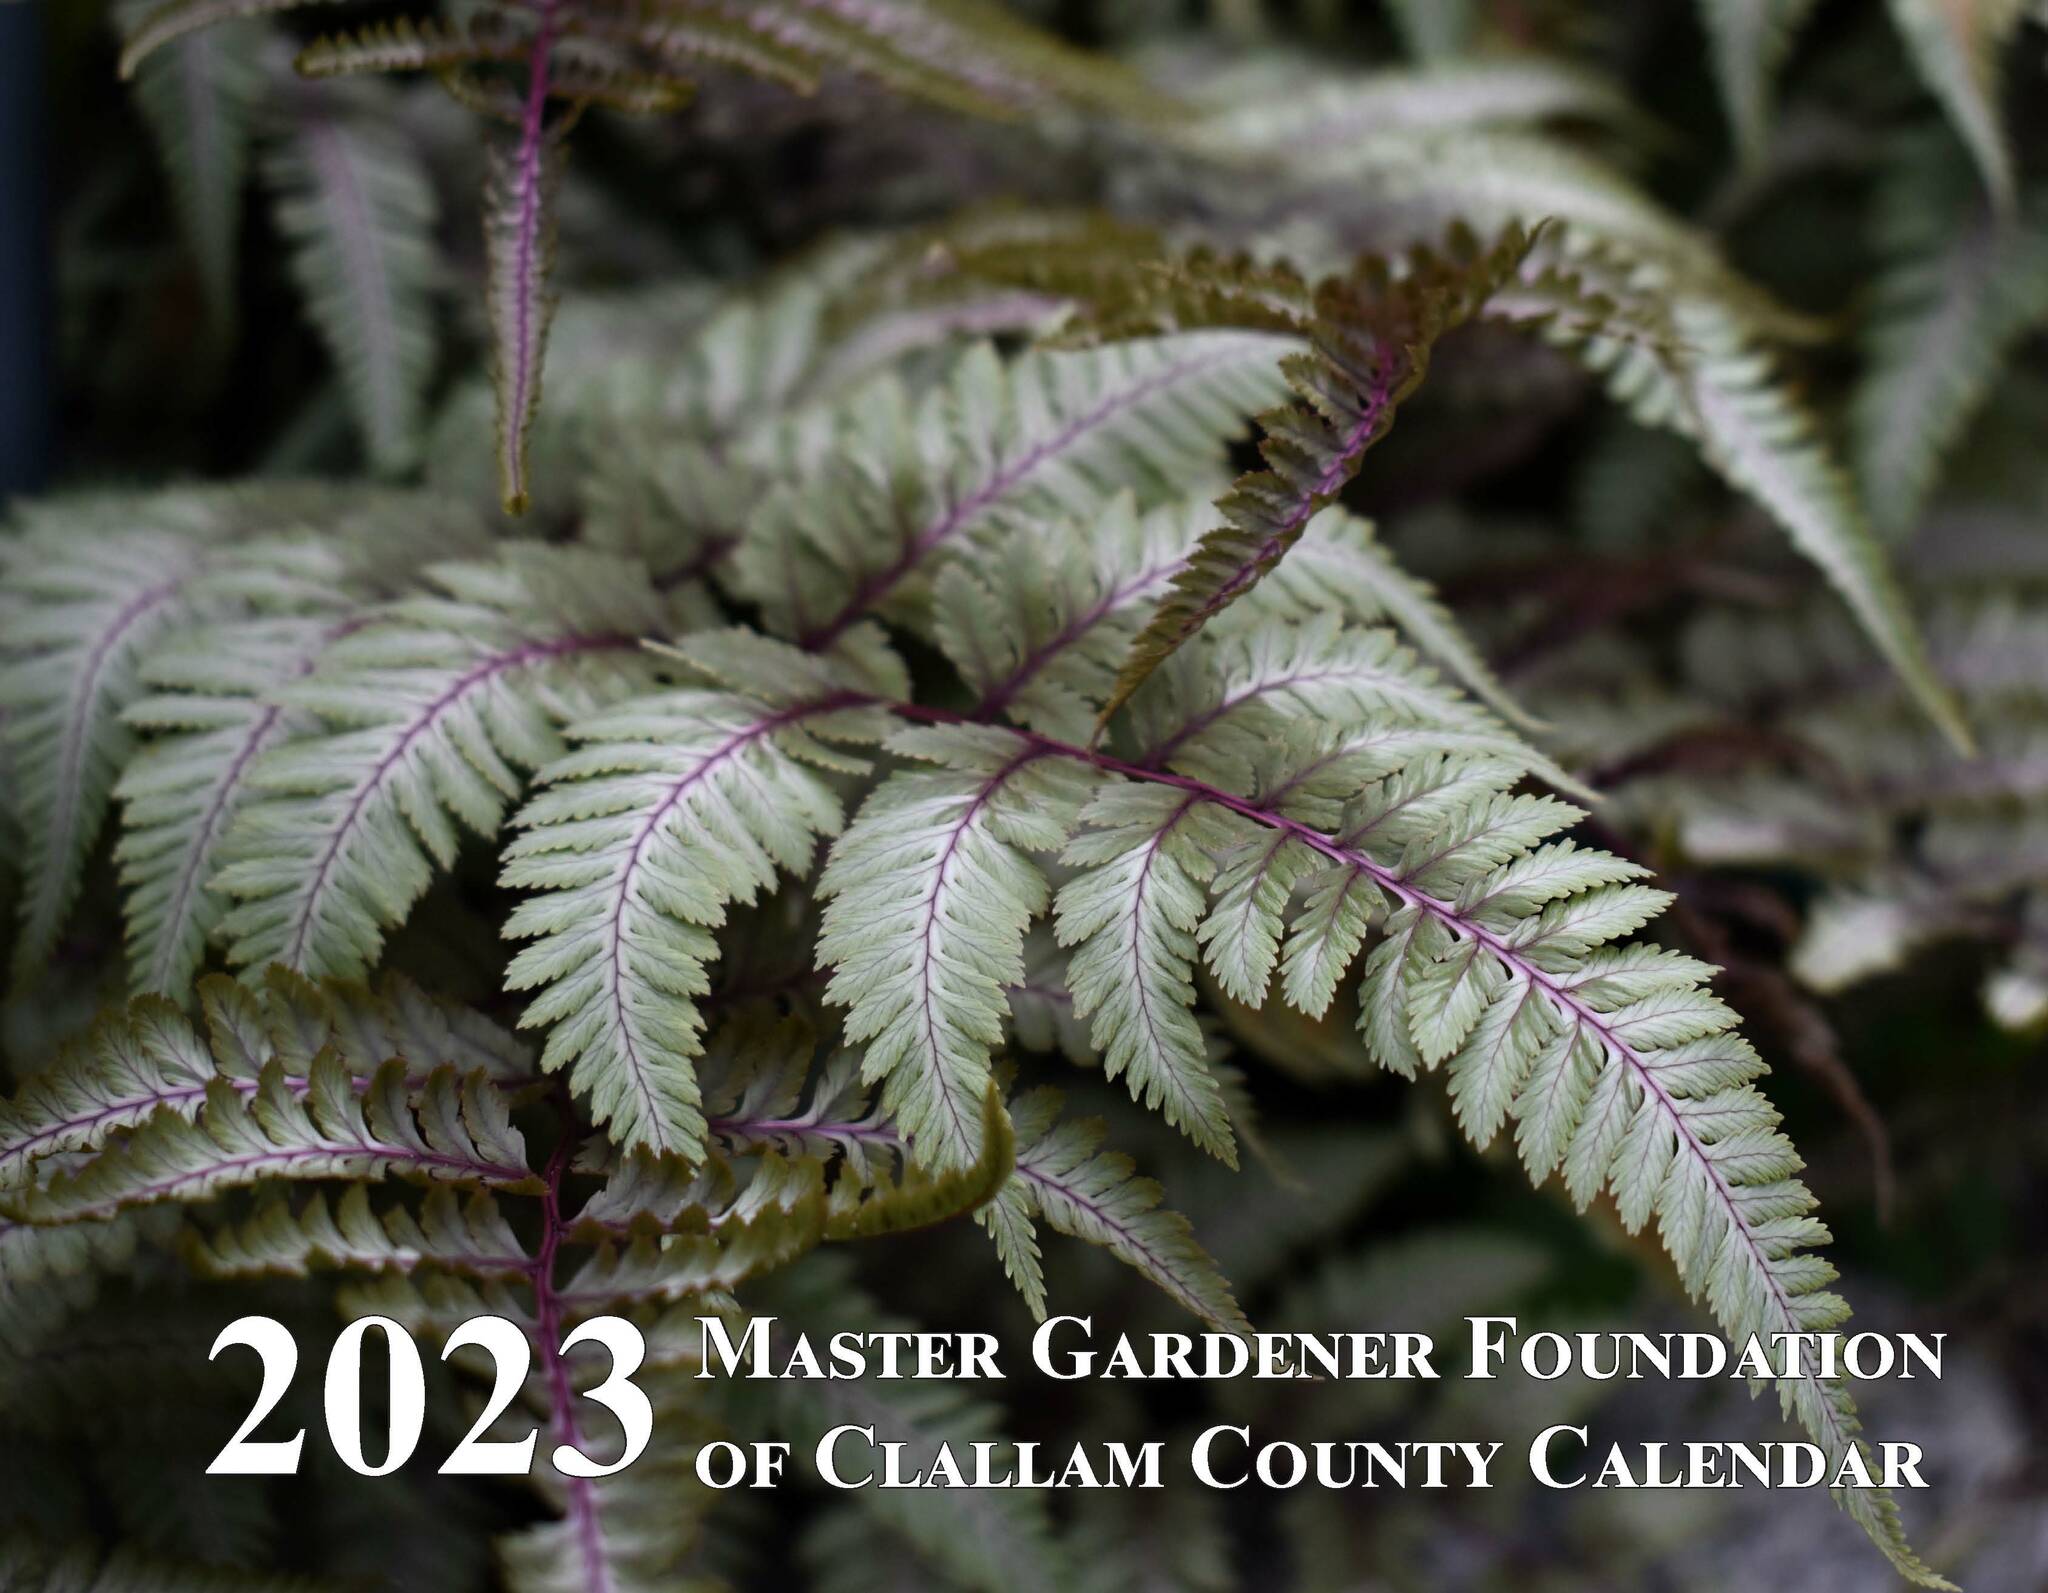 Submitted photo / The 2023 Master Gardener Foundation of Clallam County calendar is available for purchase, online, by mail and at two Port Angeles locations. The calendar features a cover photo of a Japanese fern by Amanda Rosenberg.